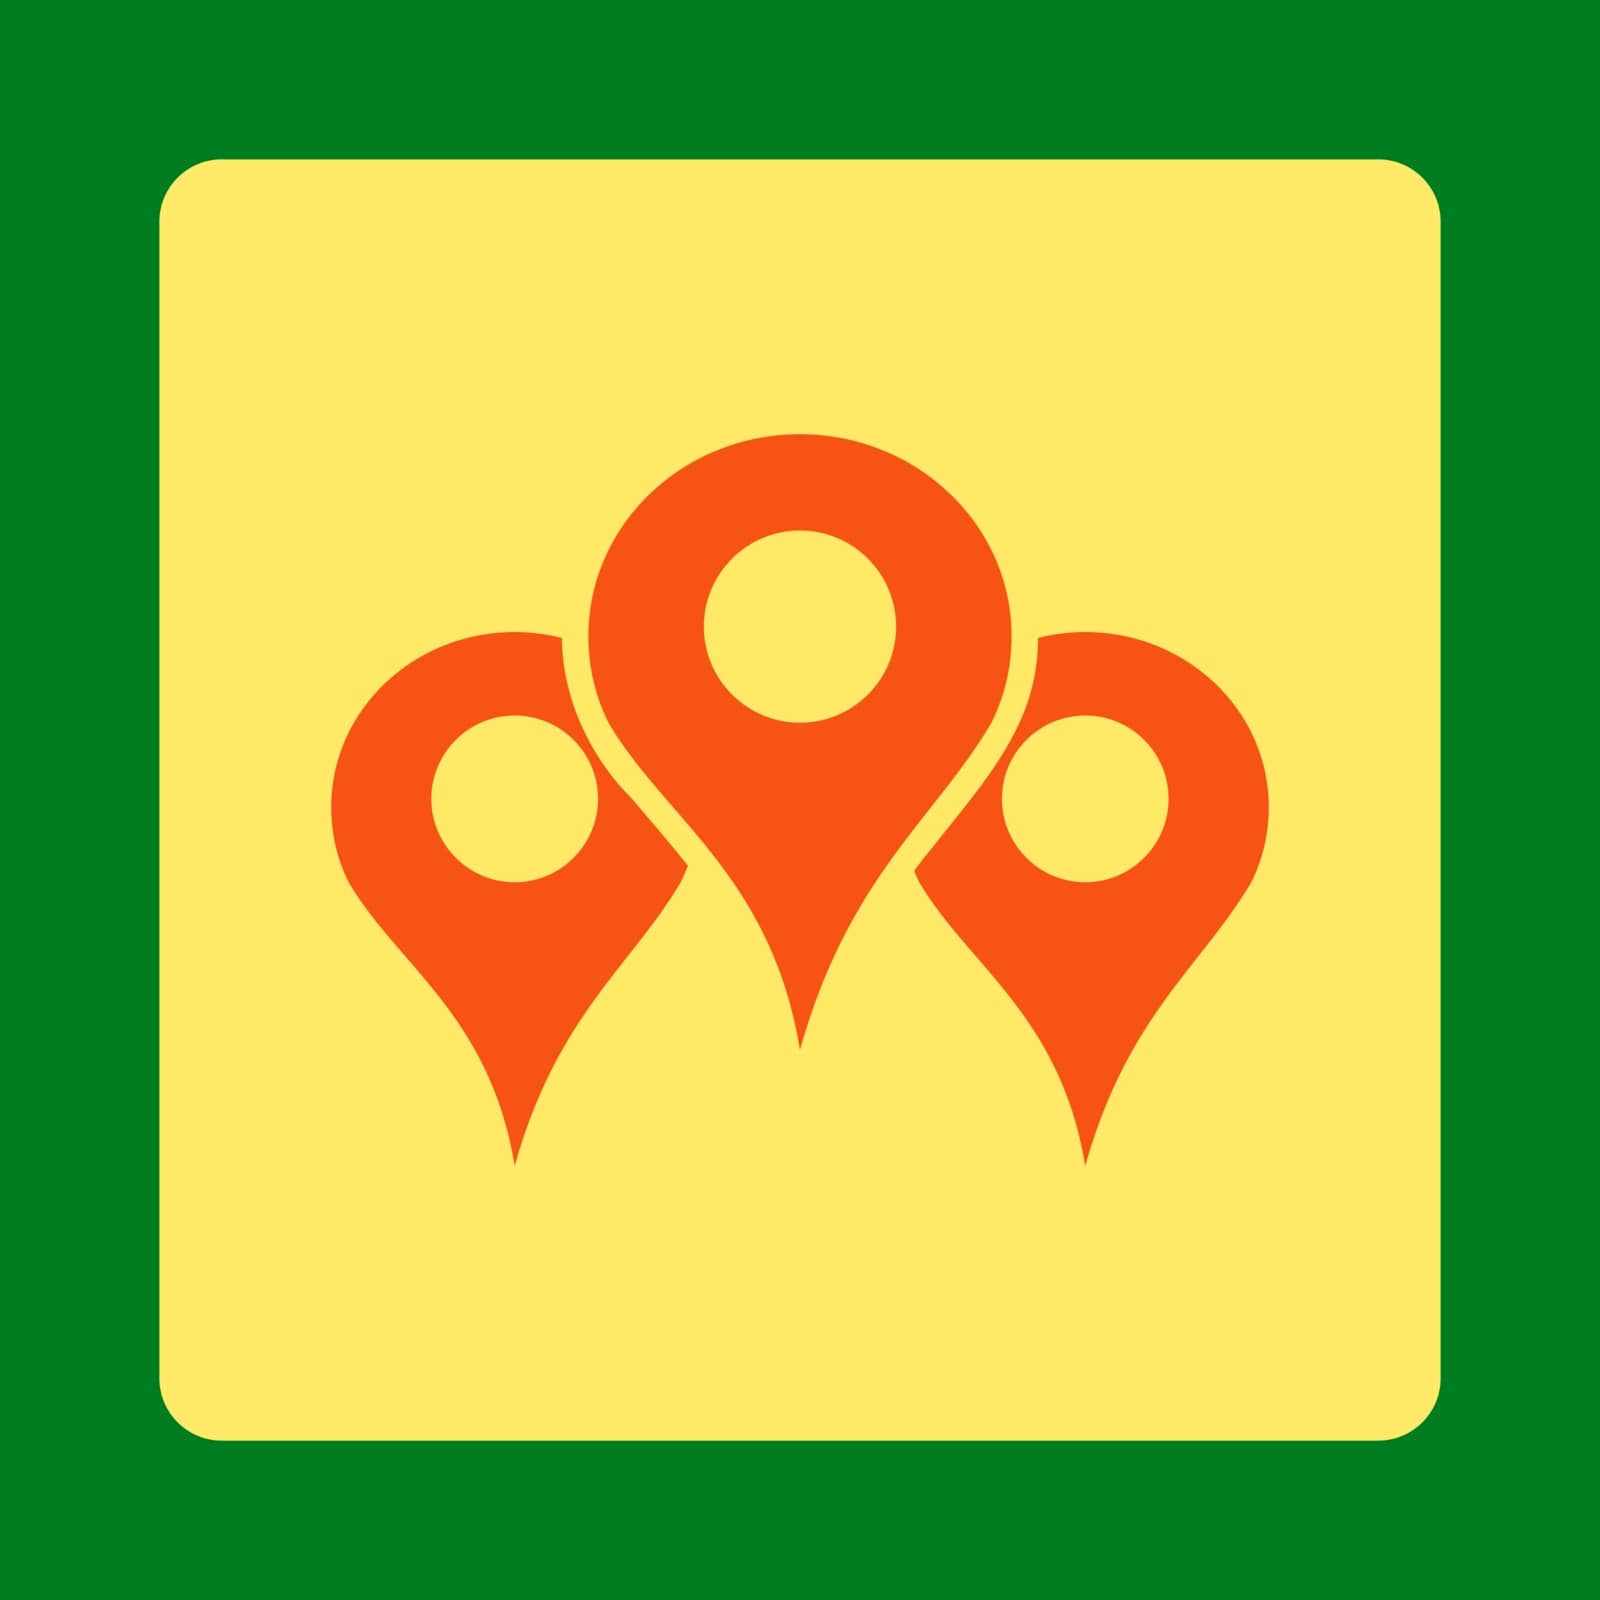 Locations vector icon. This flat rounded square button uses orange and yellow colors and isolated on a green background.